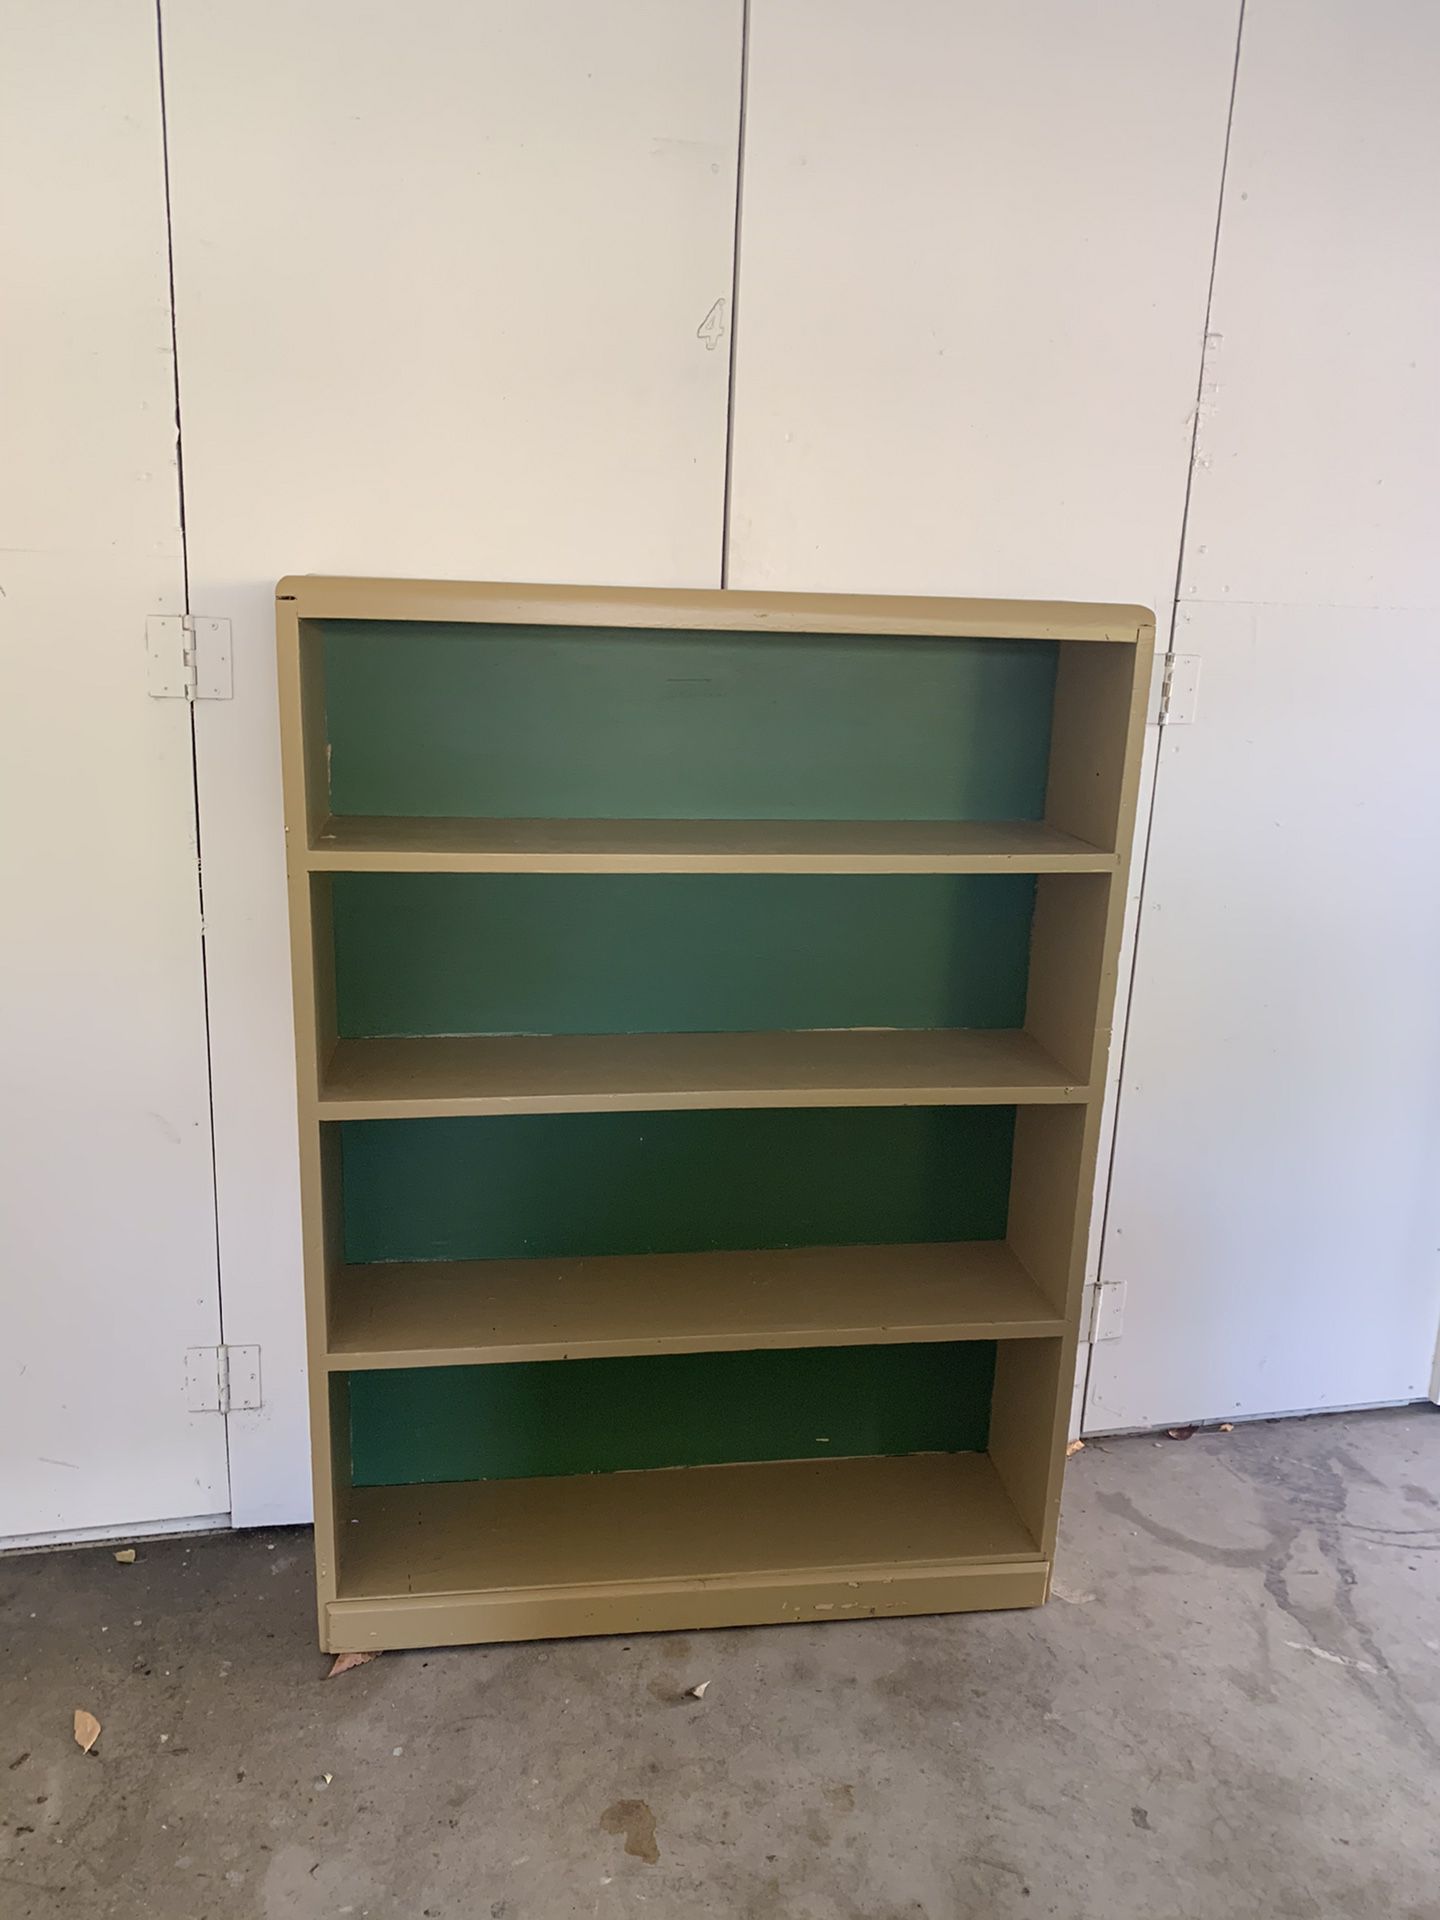 FREE!!! Wooden bookshelf (painted tan and green)